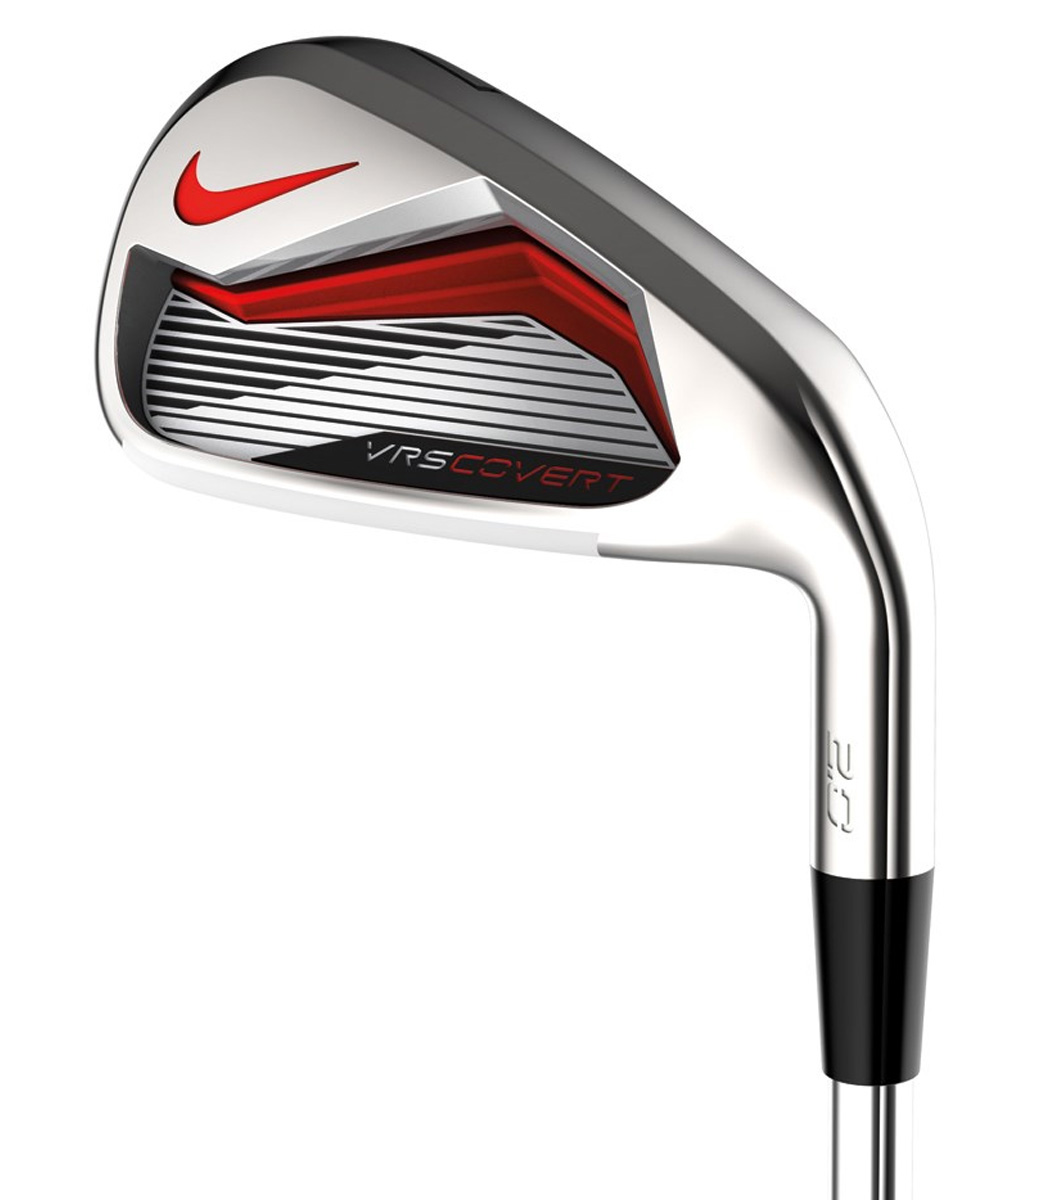 Nike VR_S Covert 2.0 Irons Review